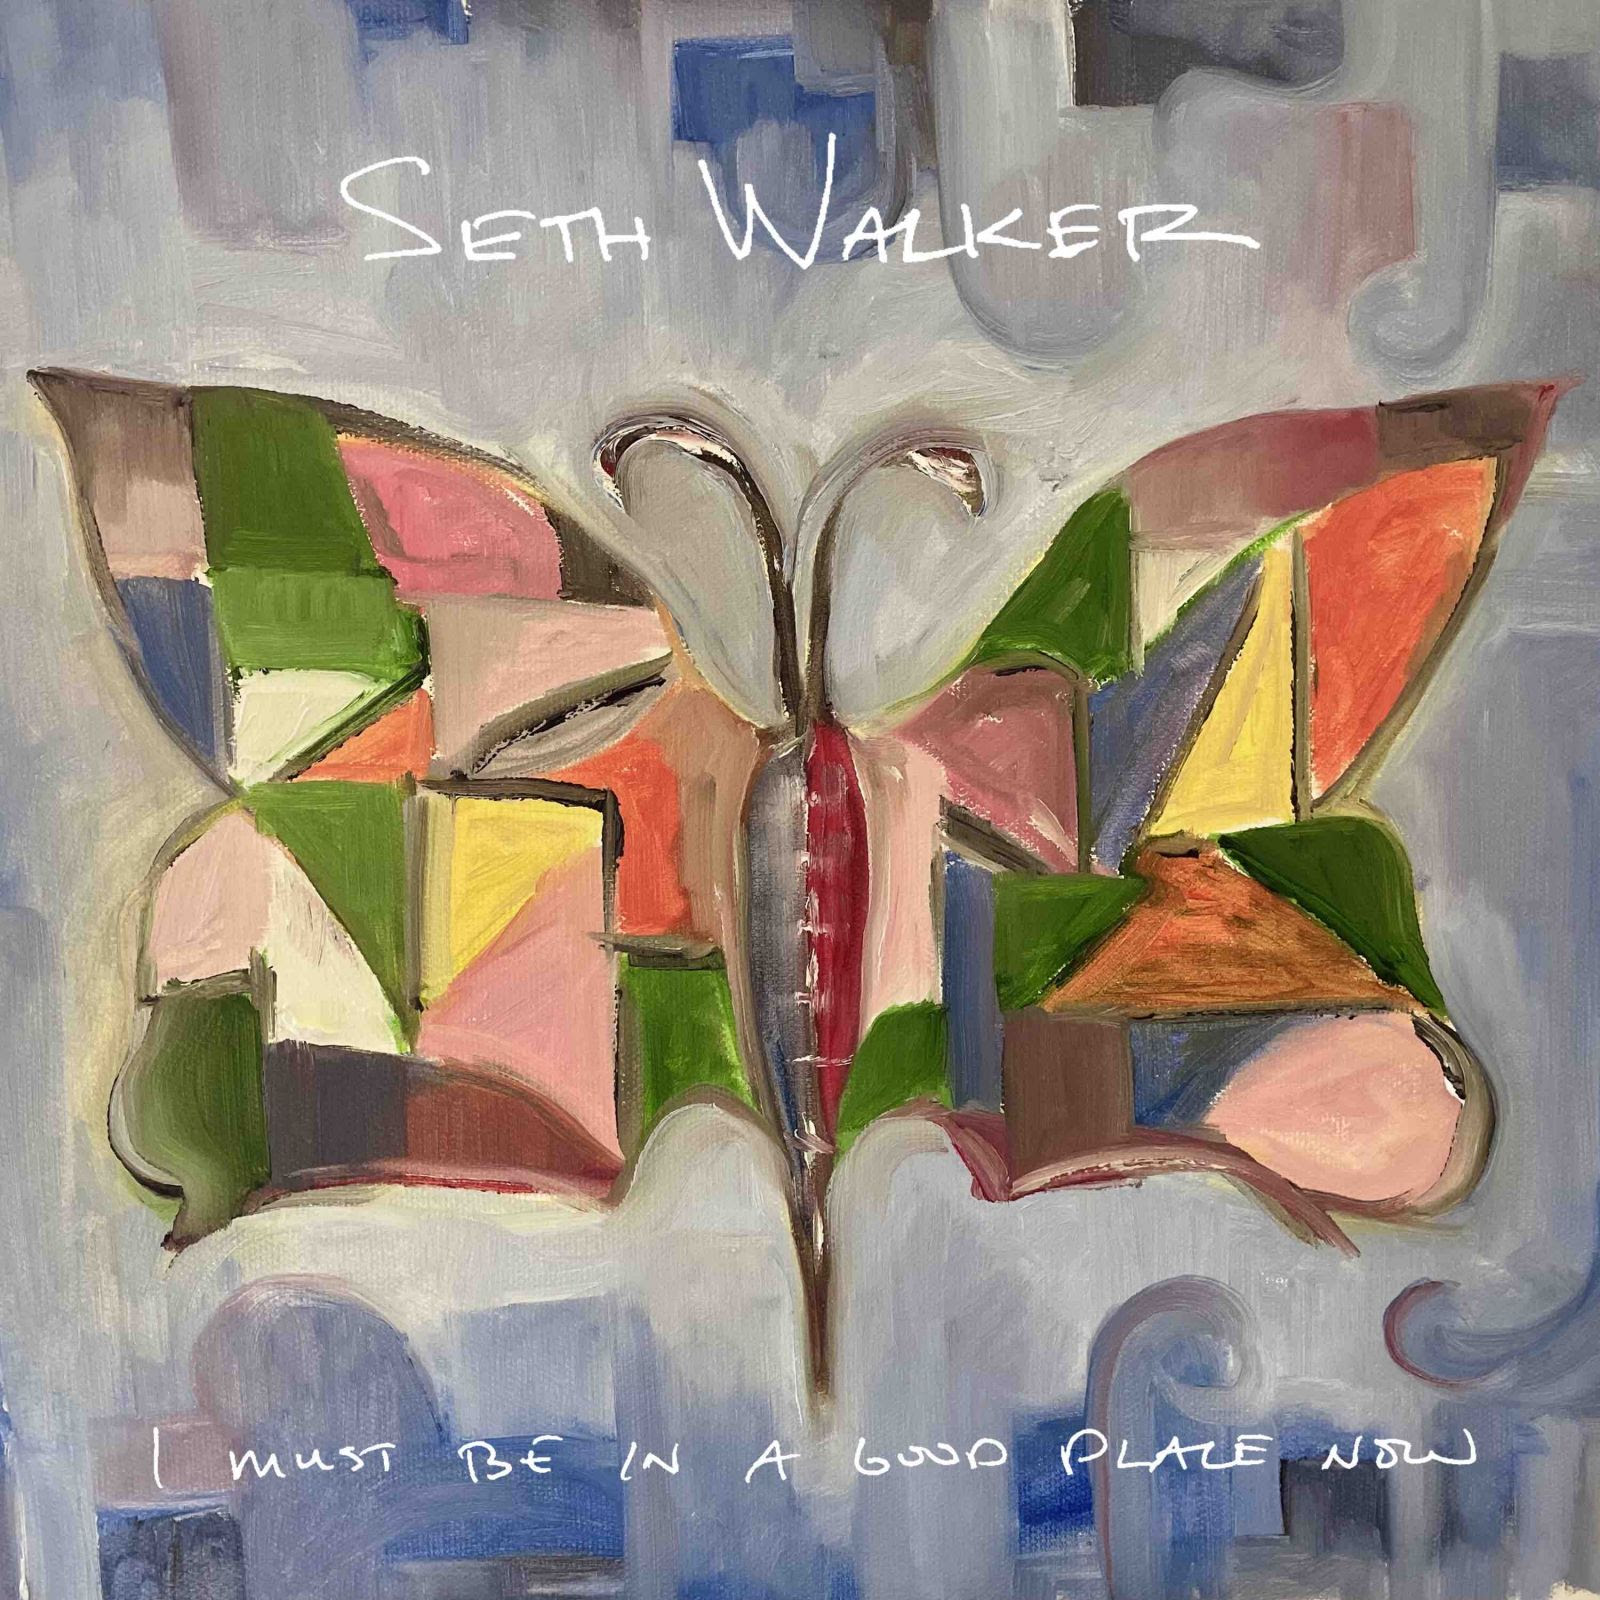 Seth Walker Shares "I Must Be In A Good Place Now"